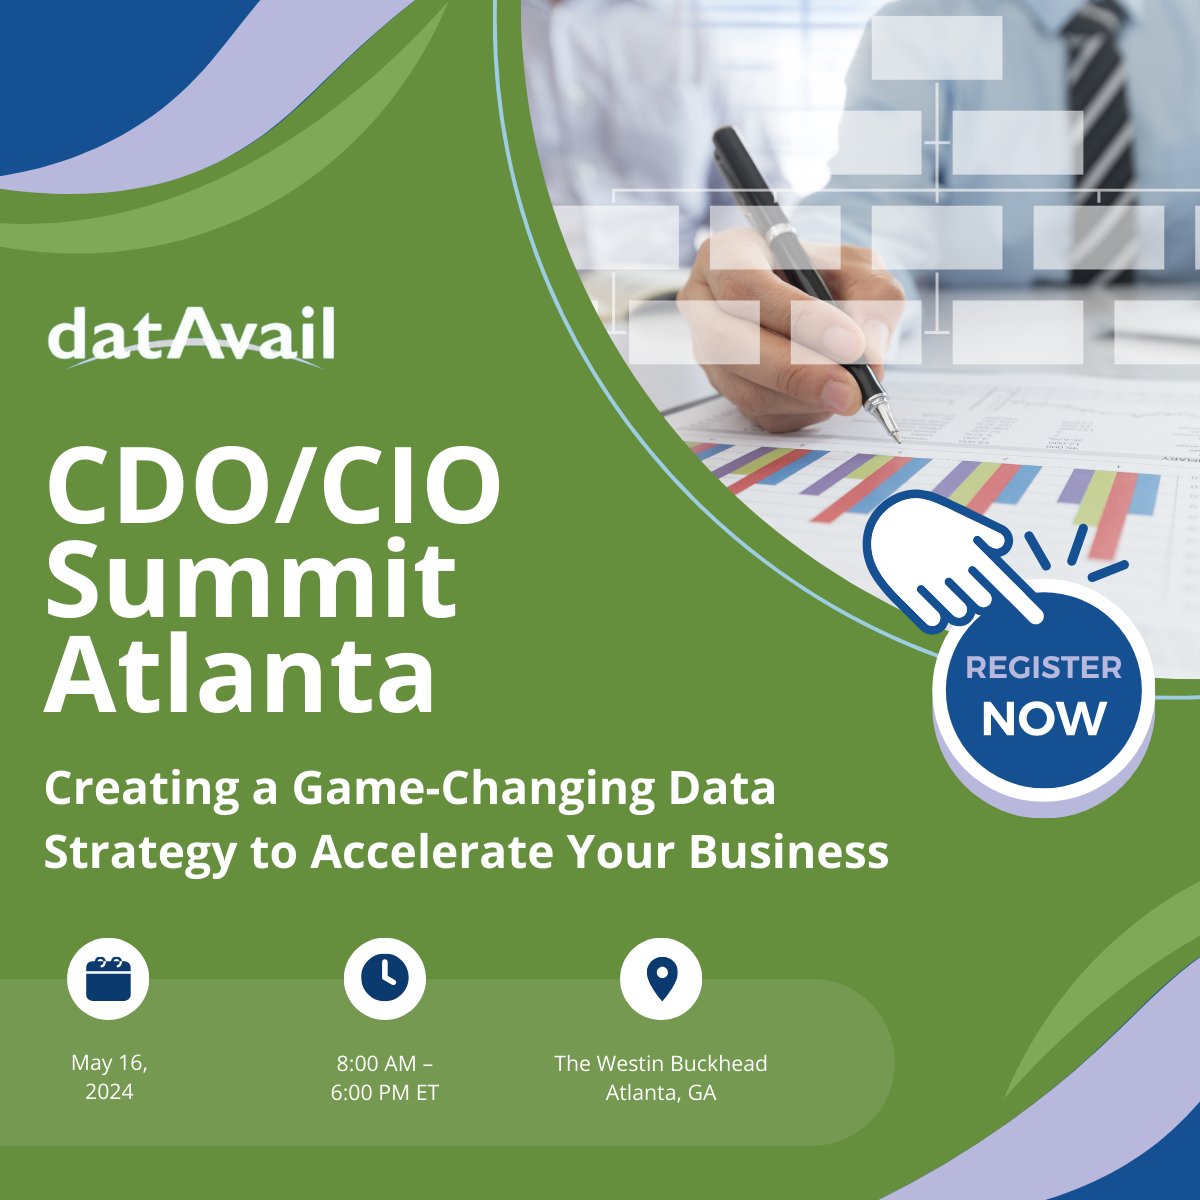 Expand your network and forge valuable connections with fellow #data & #technology leaders at the #CDO/#CIO Summit Atlanta on May 16th! Datavail is a proud sponsor of this event, offering insights into the latest #IndustryTrends & solutions. bit.ly/3W8F8dx

#datastrategy